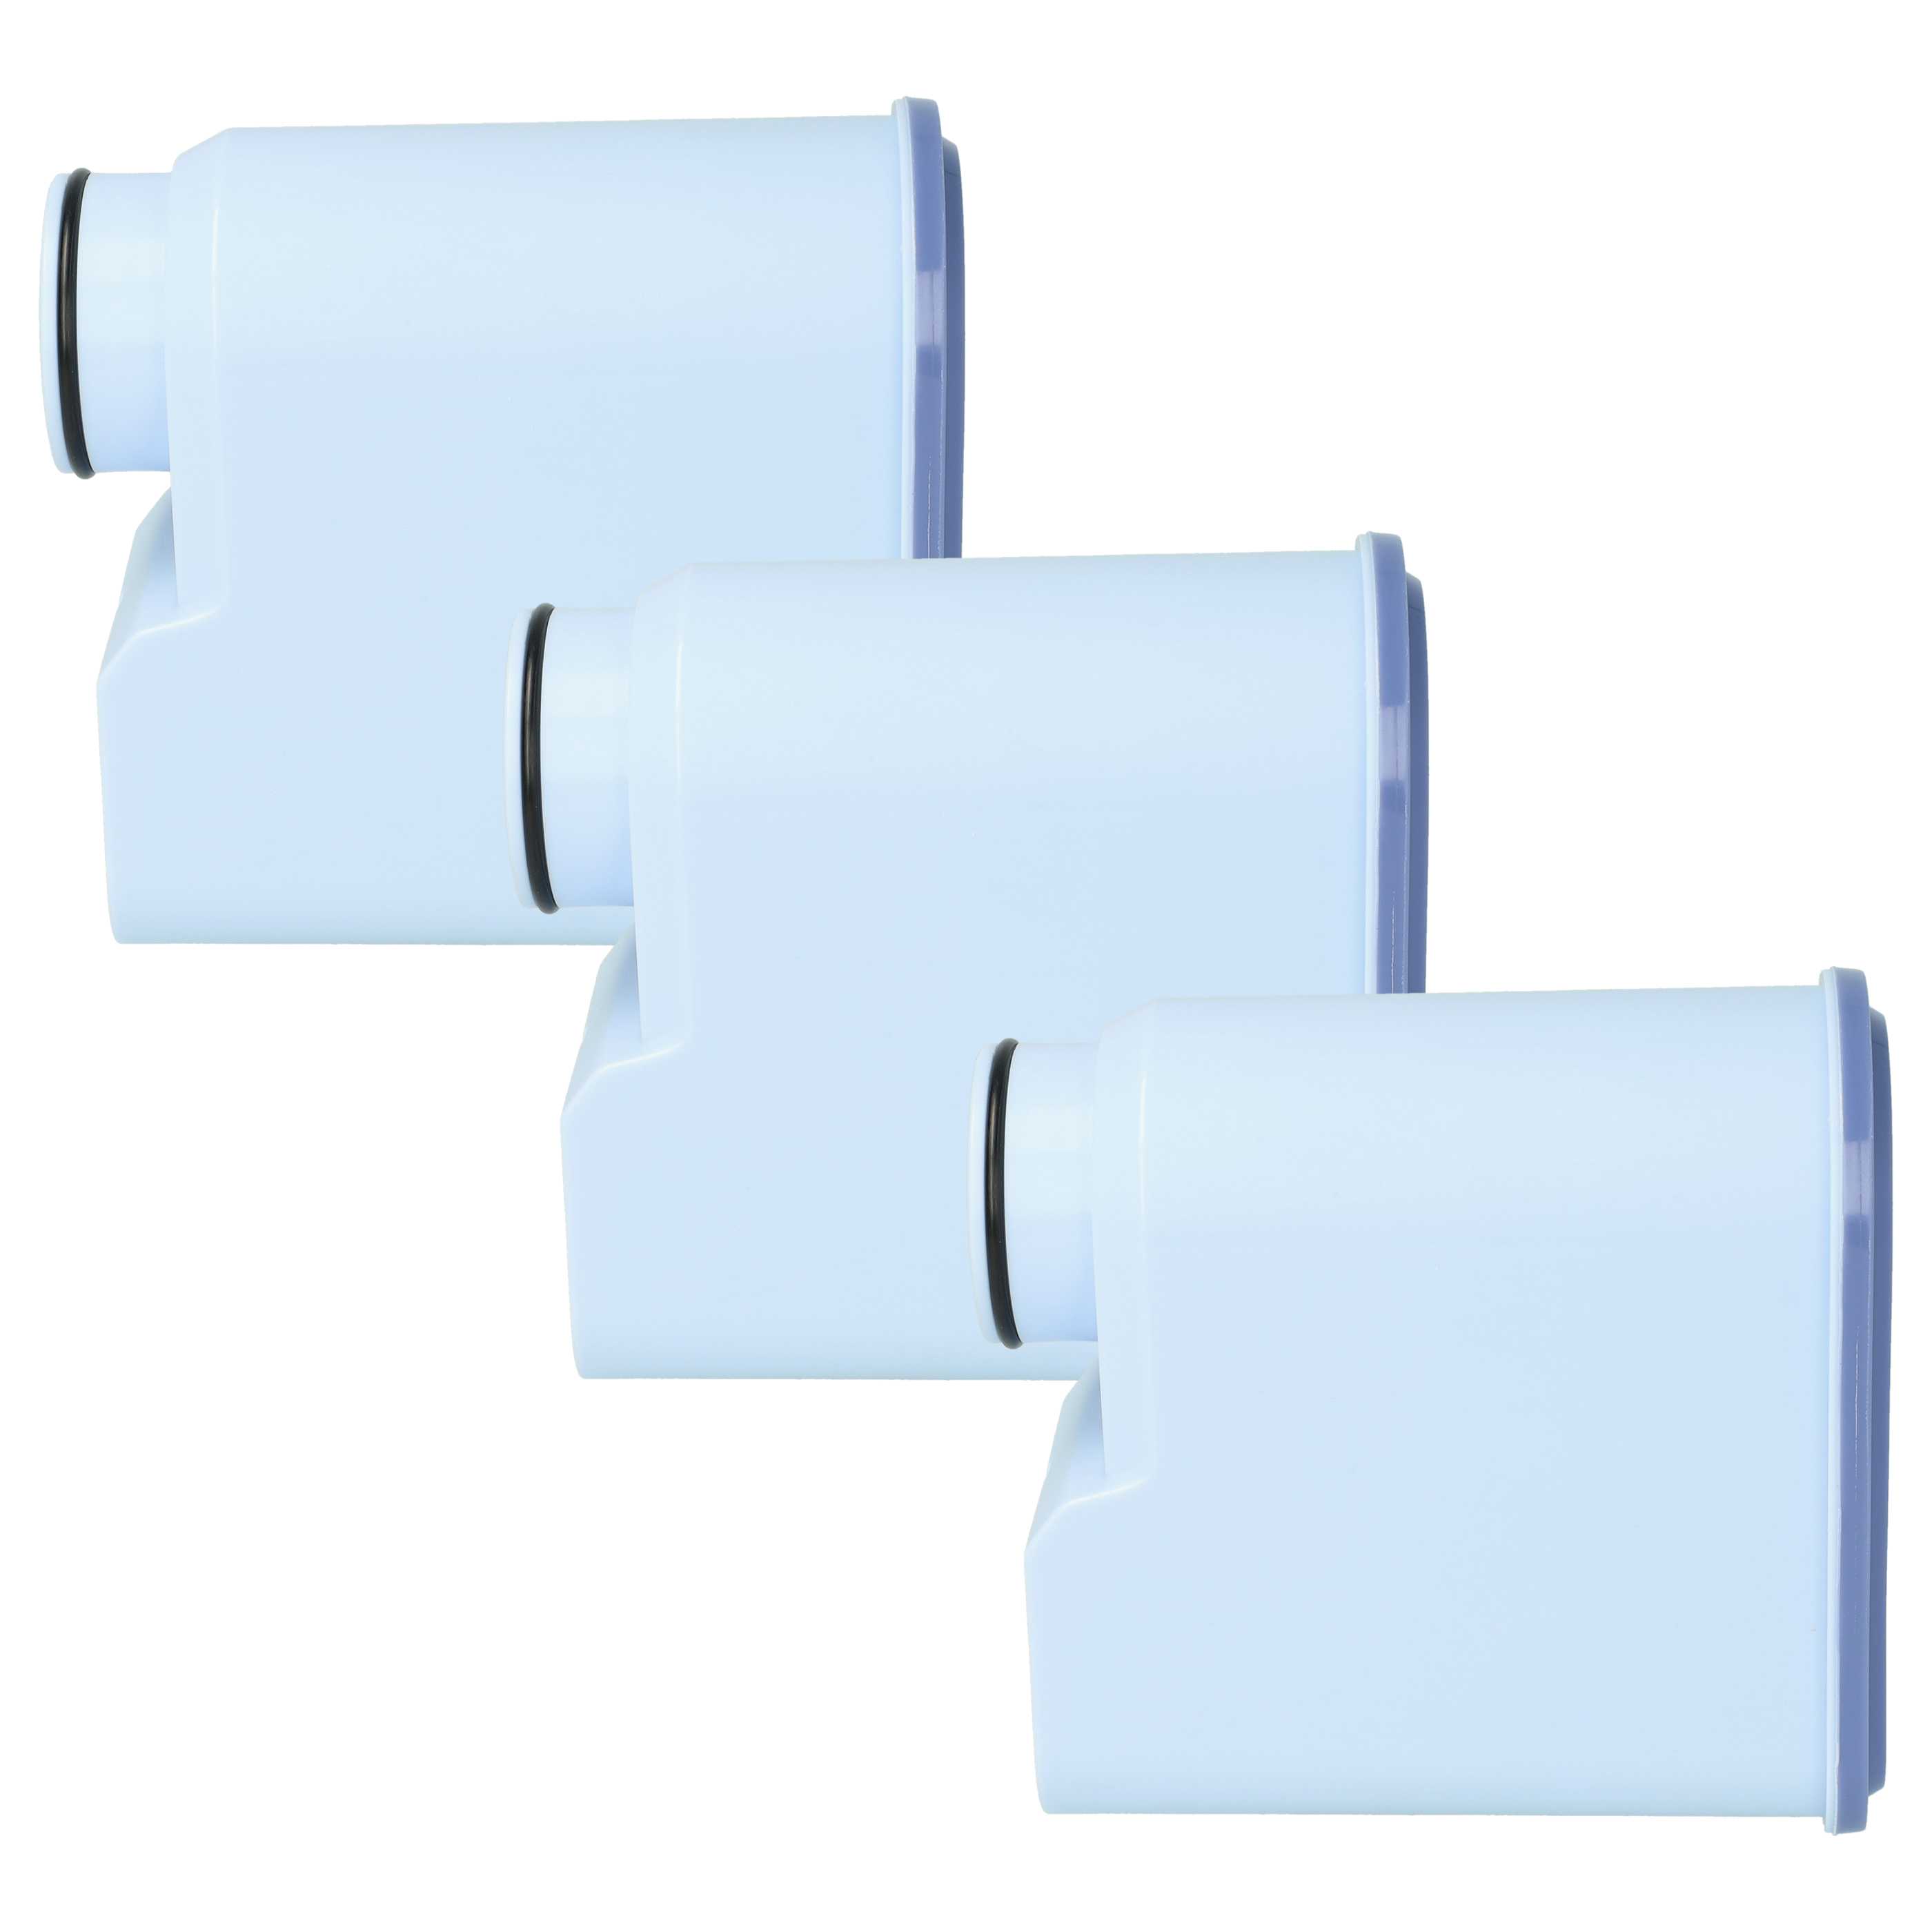 3x Water Filter replaces Philips AquaClean CA6903/10, CA6903/00 for Philips Coffee Machine etc. - Light Blue